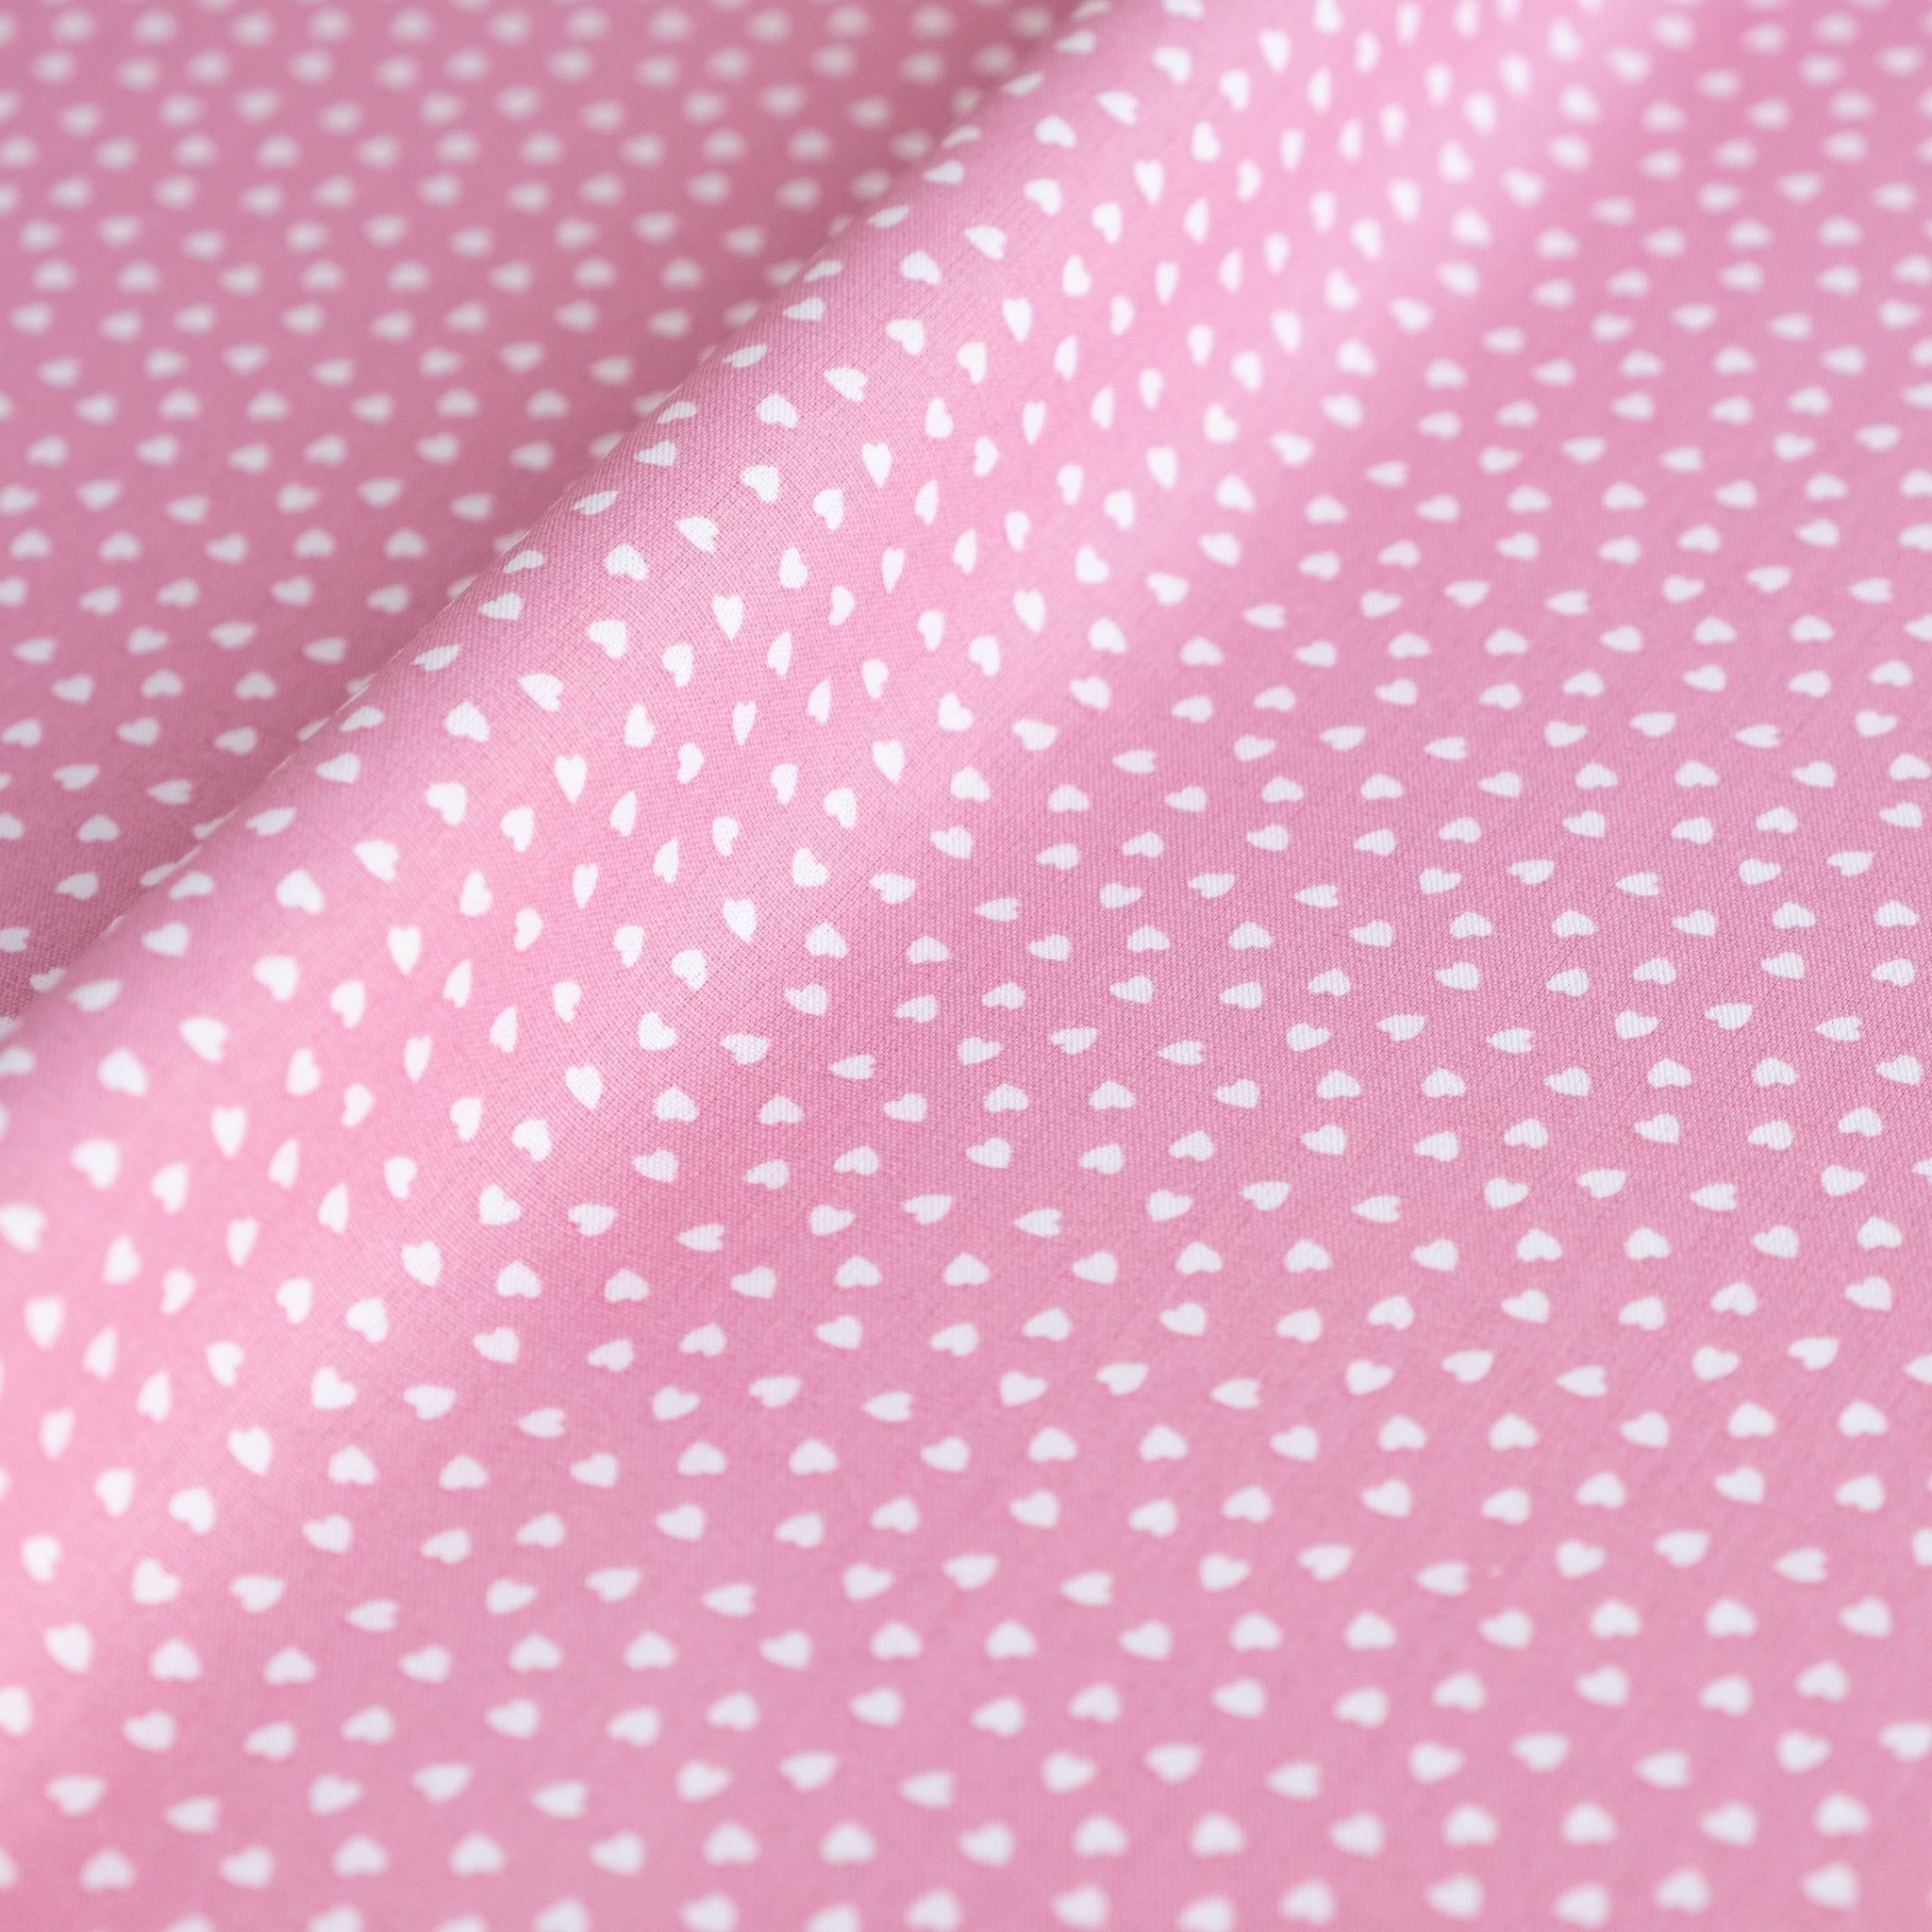 Dusky Pink Ditsy Love Hearts Valentine's Day Fabric | 100% Cotton Poplin | Extra Wide Fabric